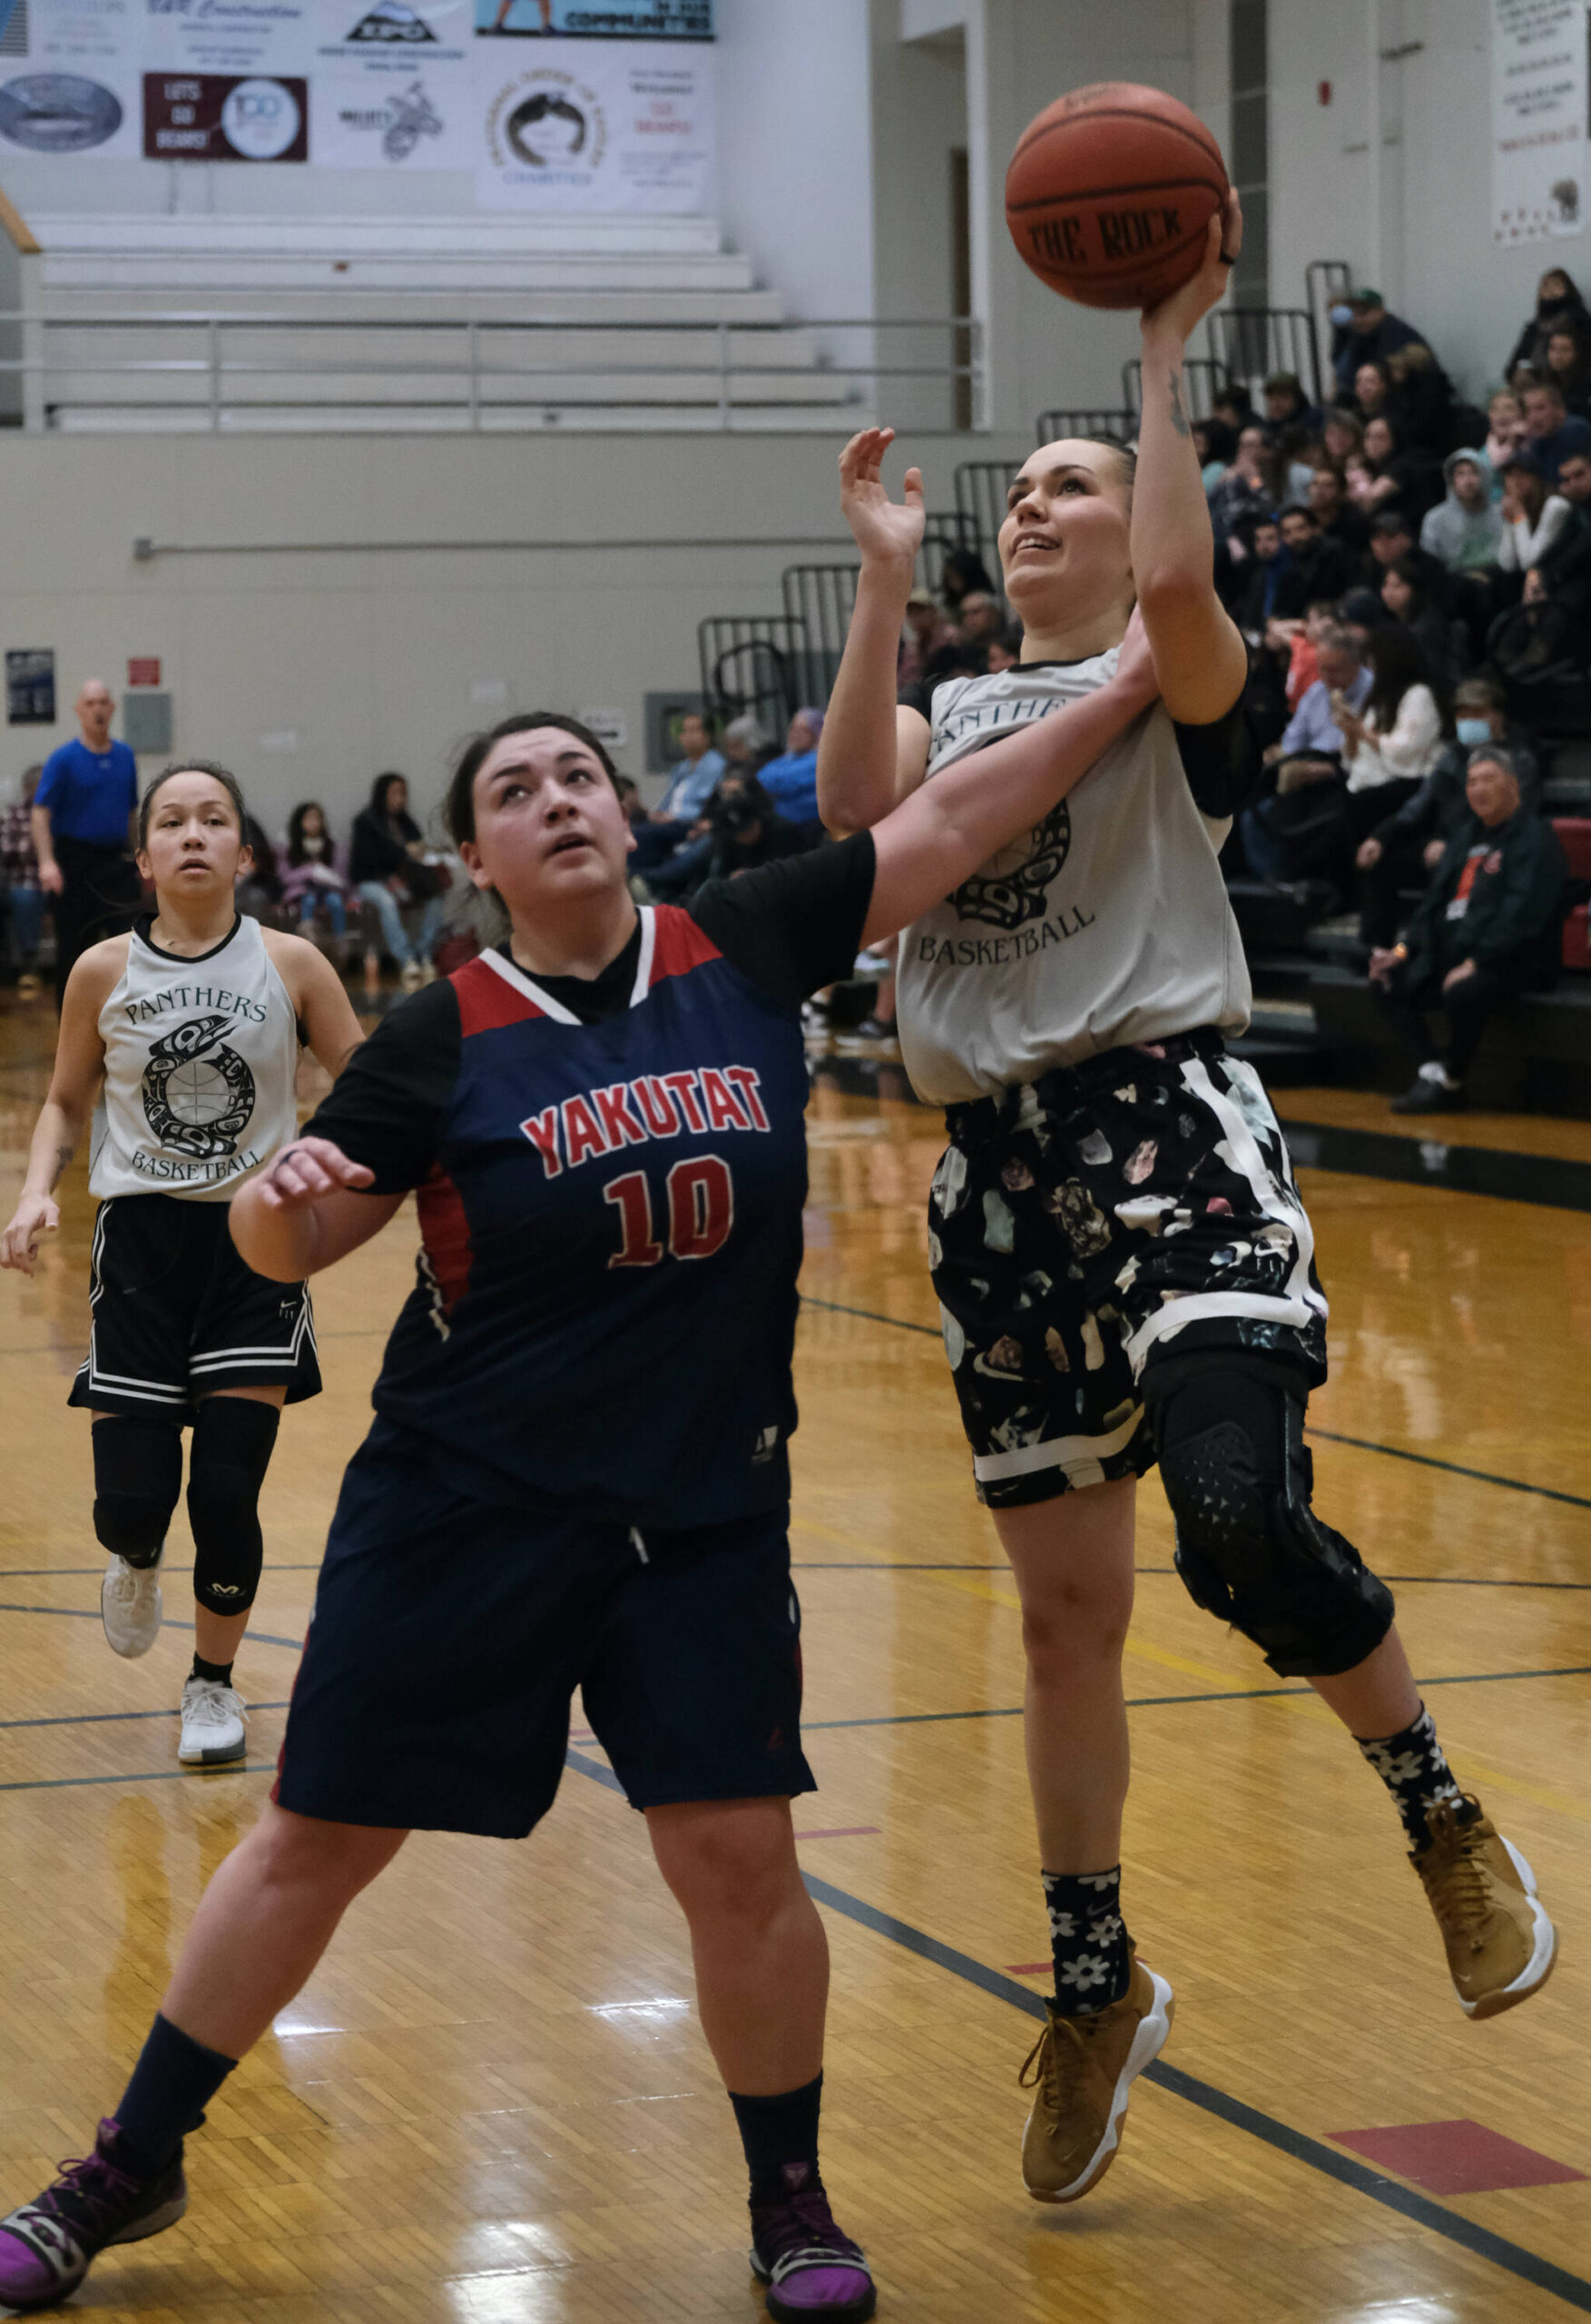 Pow’s Cassie Williams is fouled by Yakutat’s Nadine Fraker (10) in the Women’s Championship game of the Gold Medal Basketball Tournament, Saturday, March 25, at Juneau-Douglas High School: Yadaa.at Kalé. (Klas Stolpe/For the Juneau Empire)